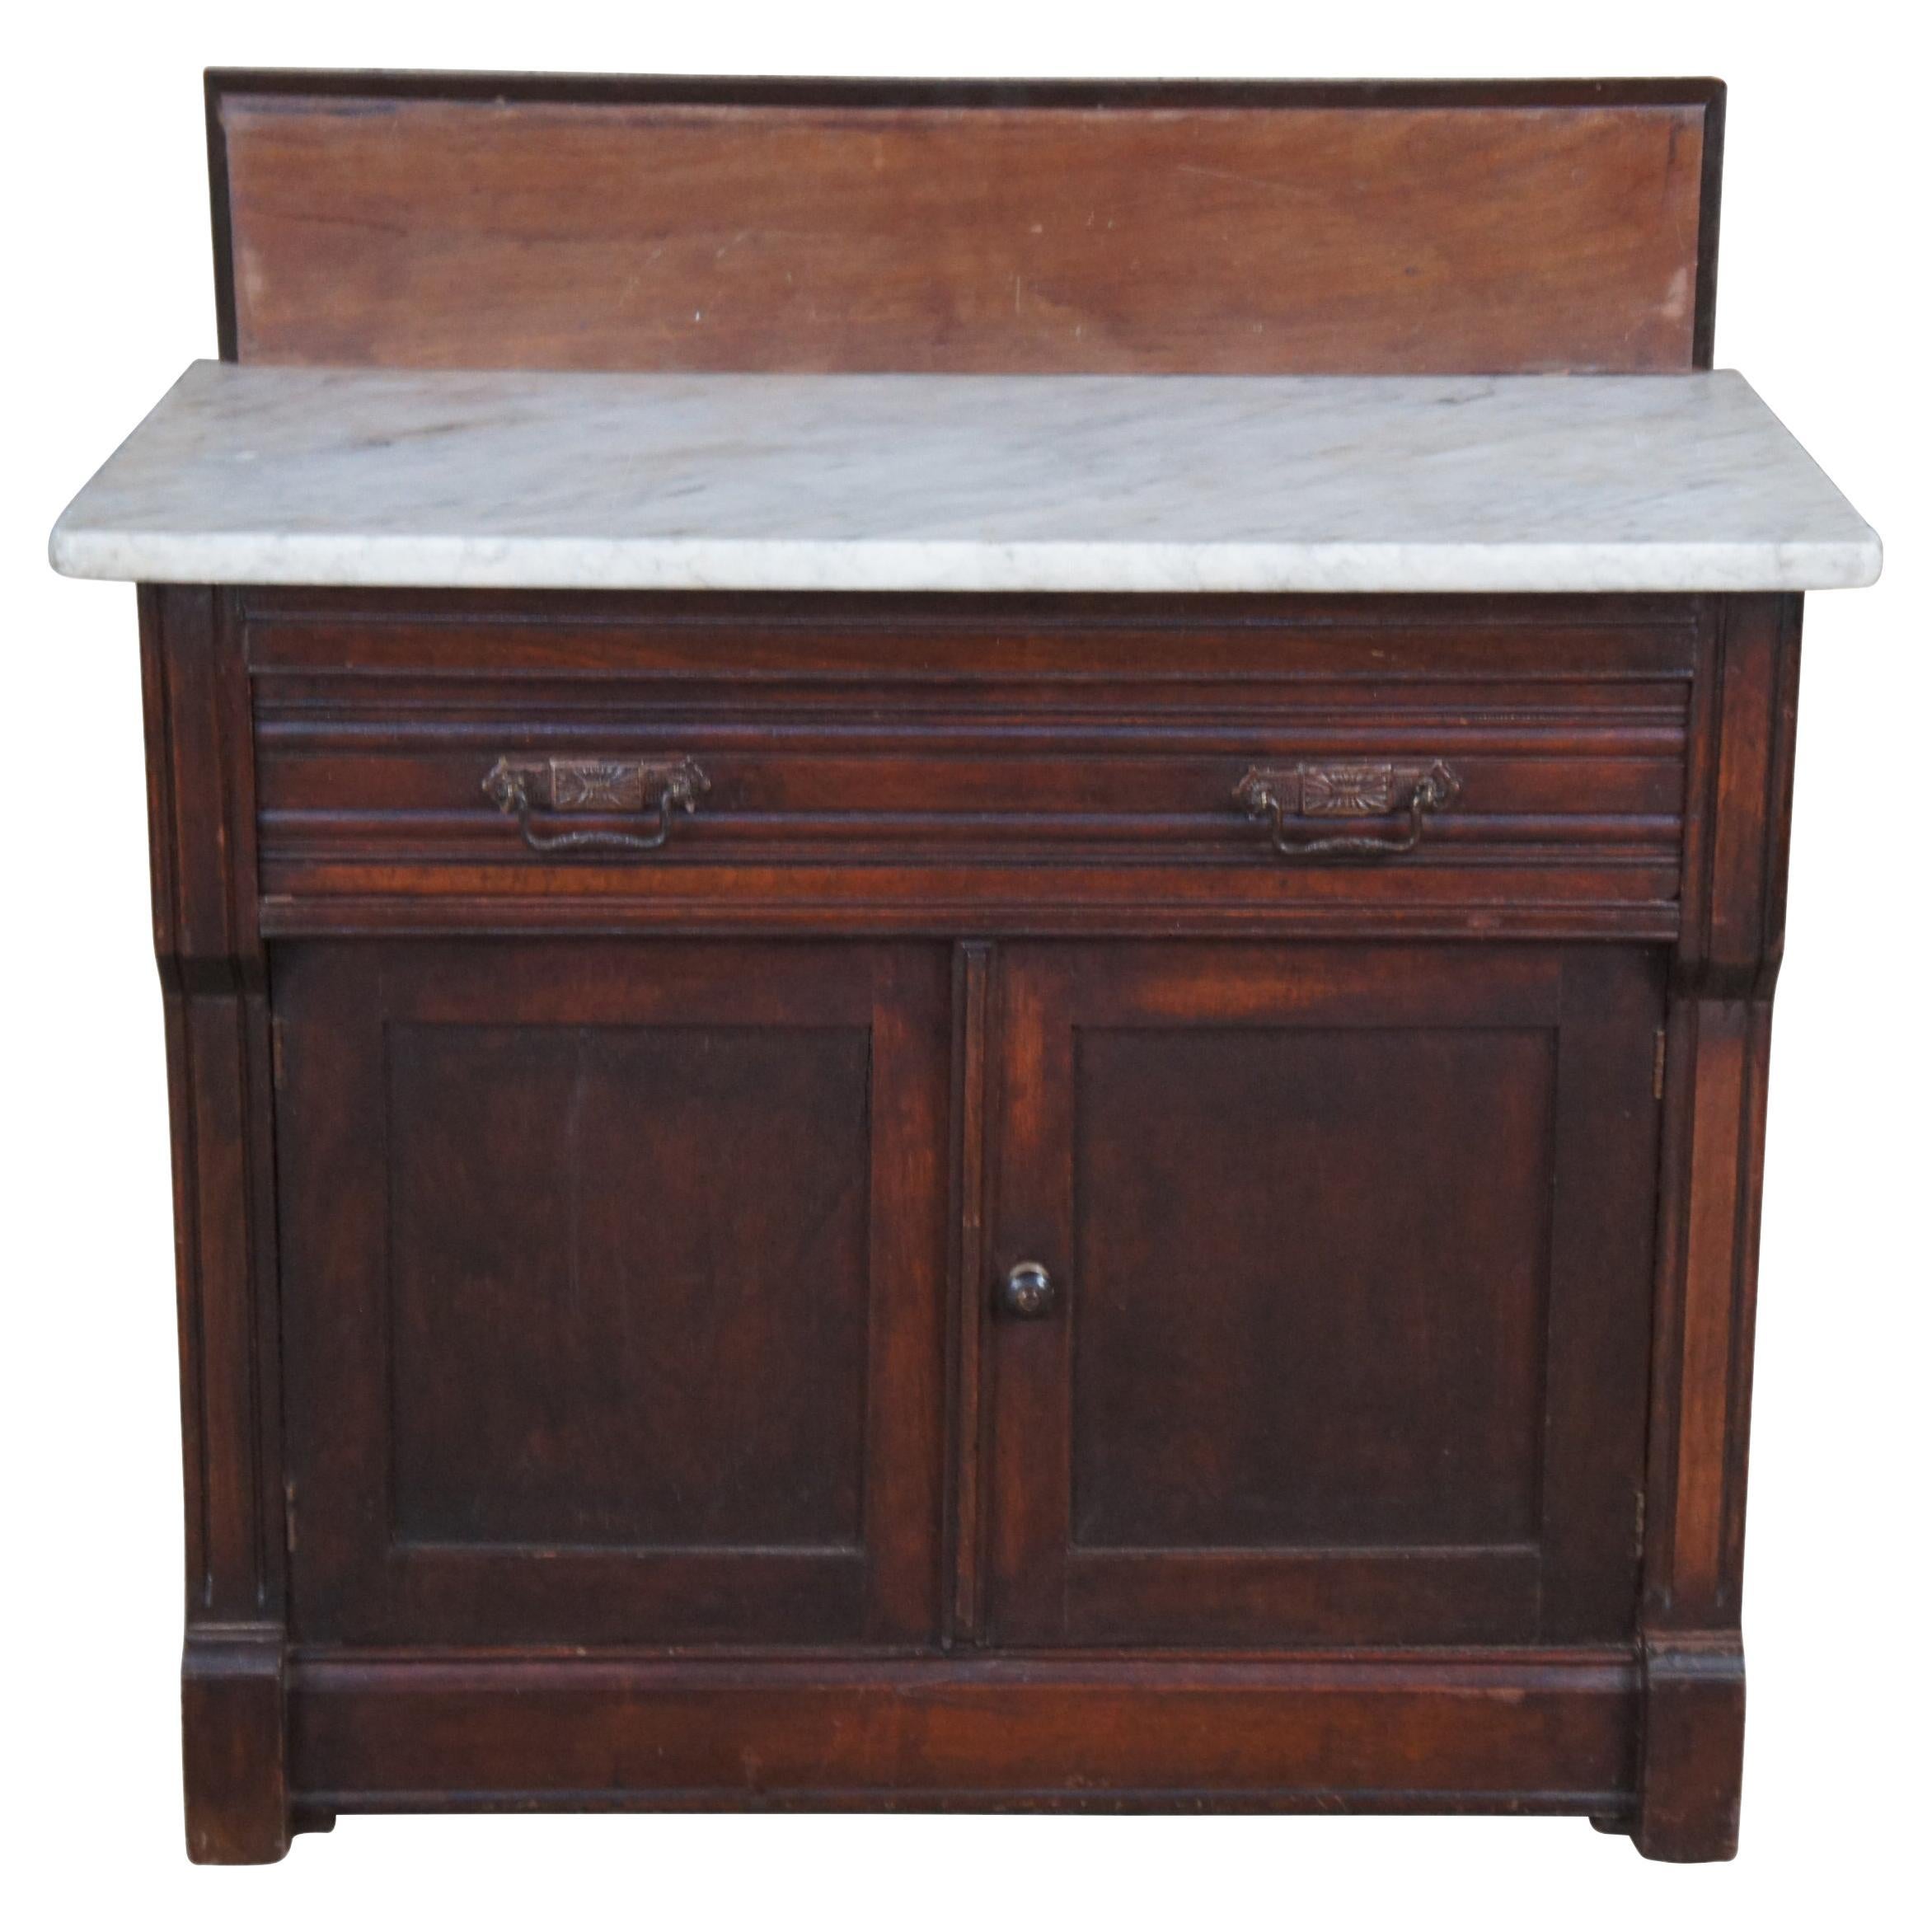 Antique Victorian Eastlake Mahogany Marble Top Wash Stand Basin Cabinet 